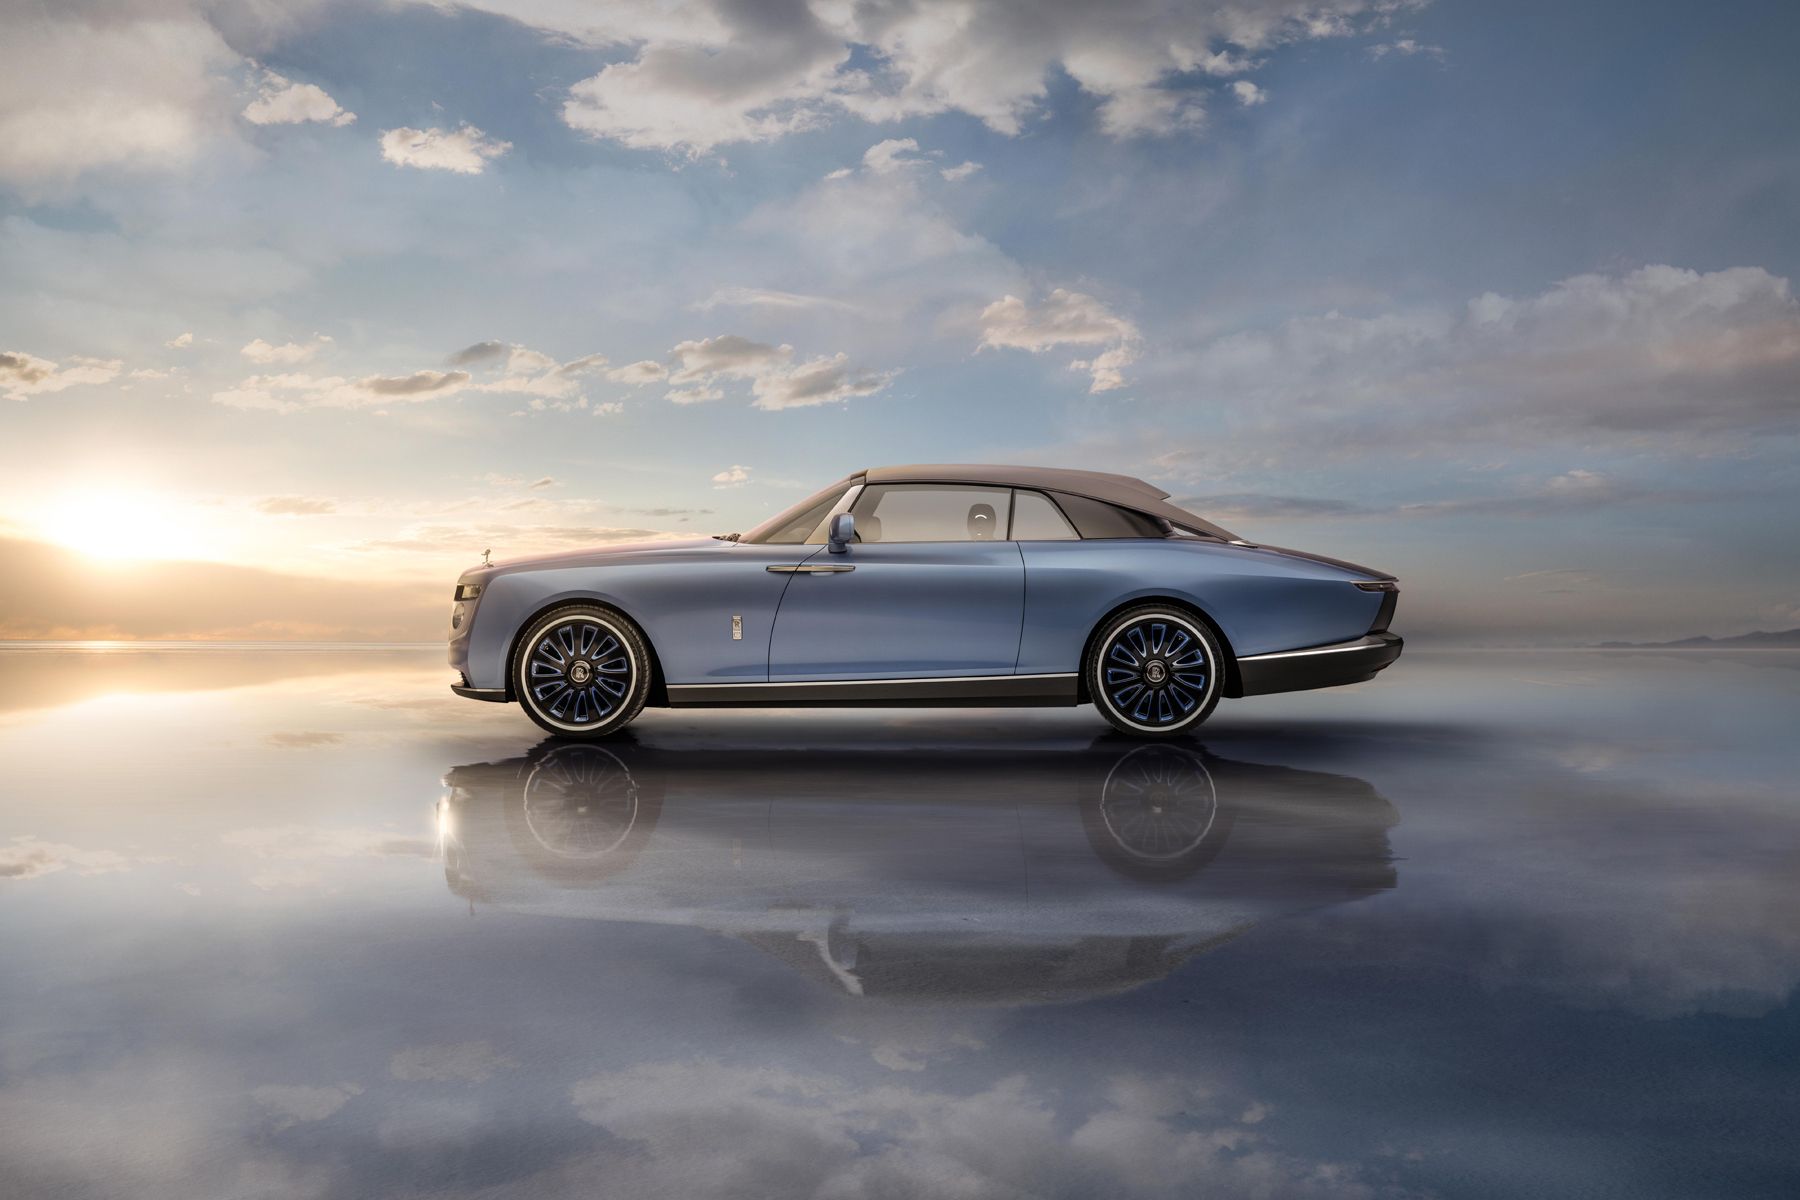 RollsRoyce debuts its stunning 10 million Sweptail  the most expensive  new car ever sold